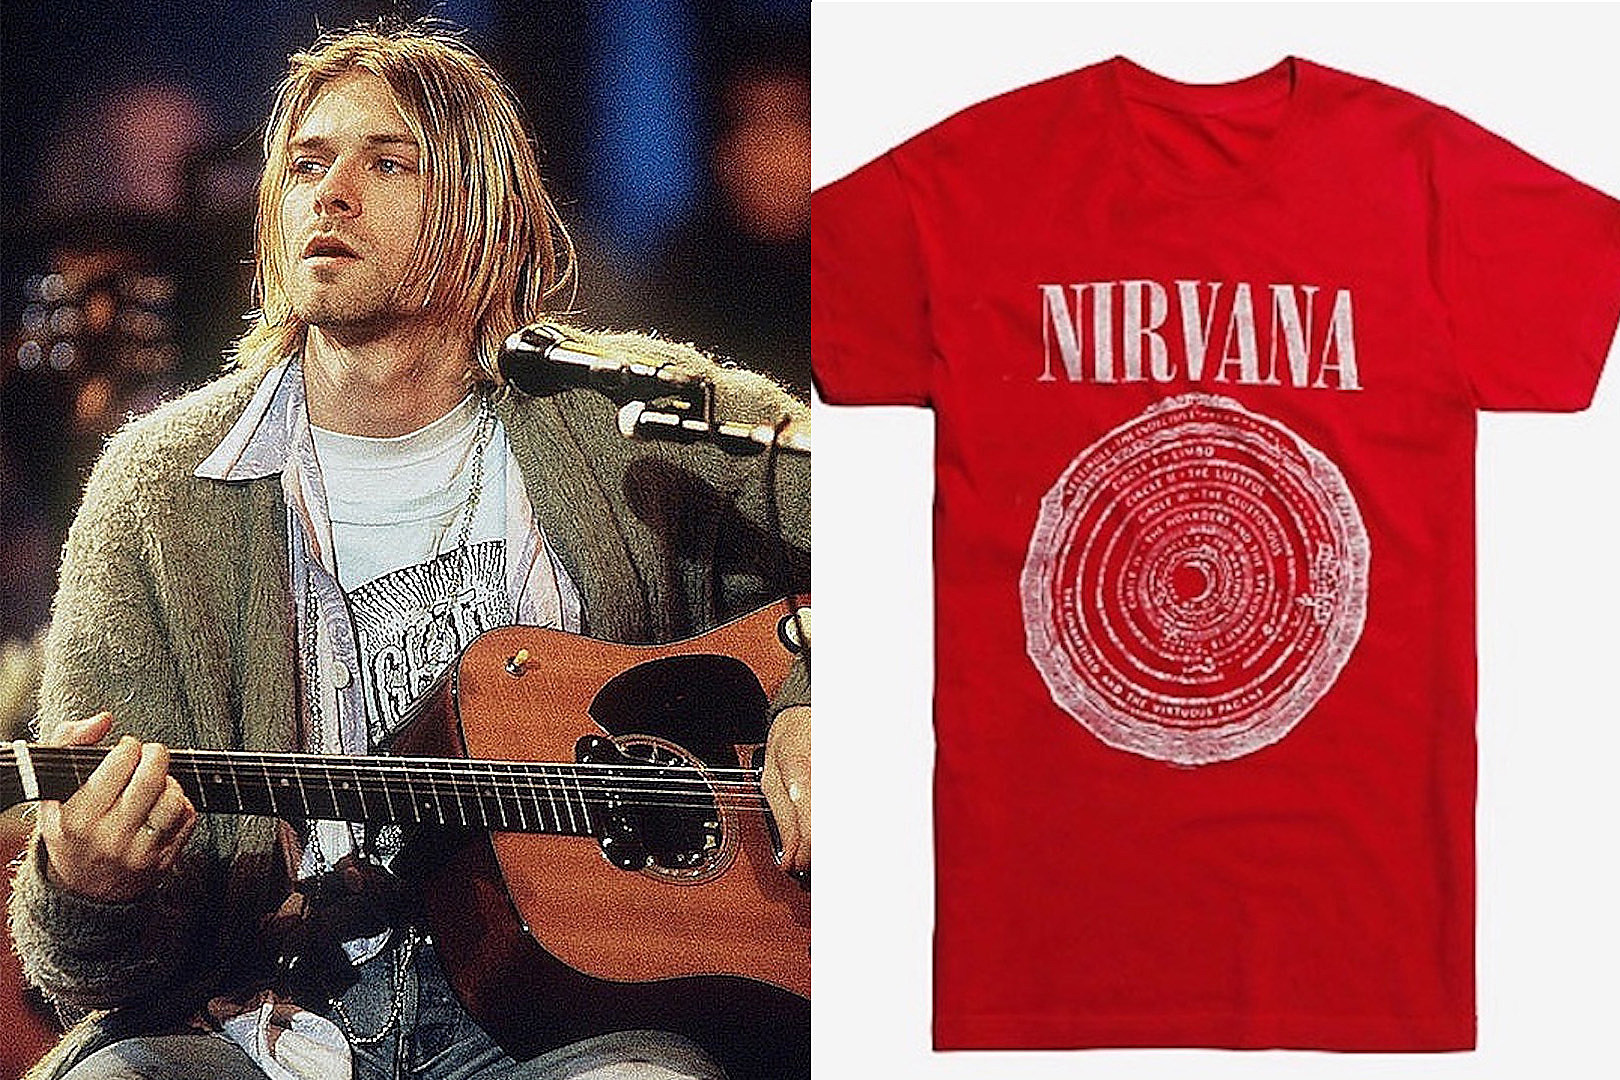 Nirvana Sued Over Merch Design Inspired By Dantes Inferno image